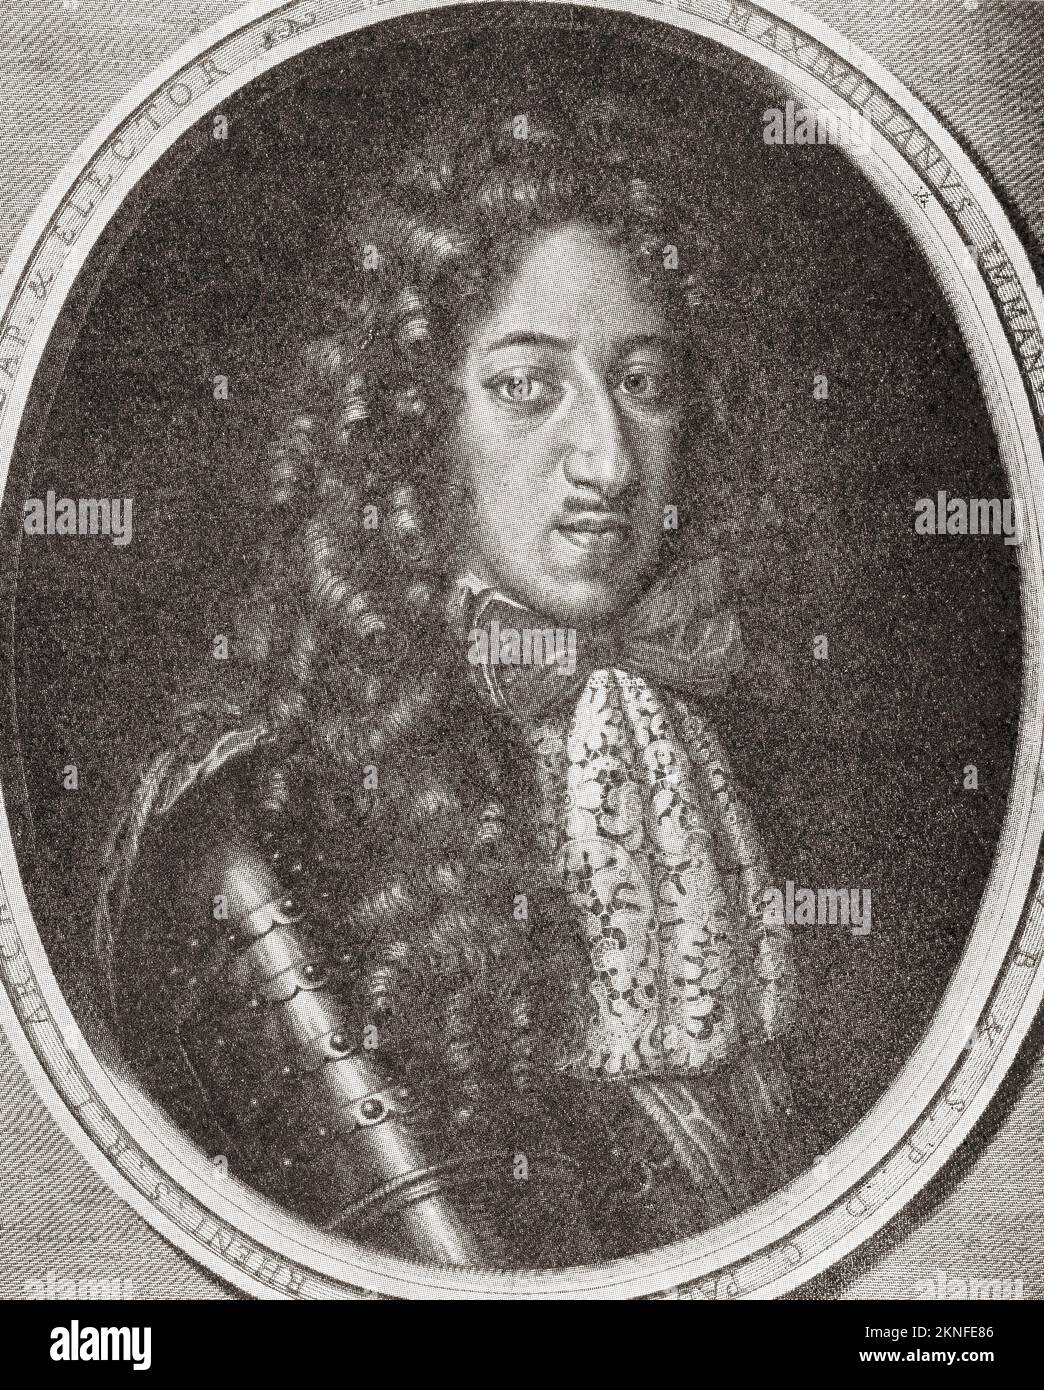 Maximilian II, 1662 –  1726, aka Max Emanuel or Maximilian Emanuel.  A Wittelsbach ruler of Bavaria, Prince-elector of the Holy Roman Empire, last governor of the Spanish Netherlands and Duke of Luxembourg.  From Modes and Manners, published 1935. Stock Photo